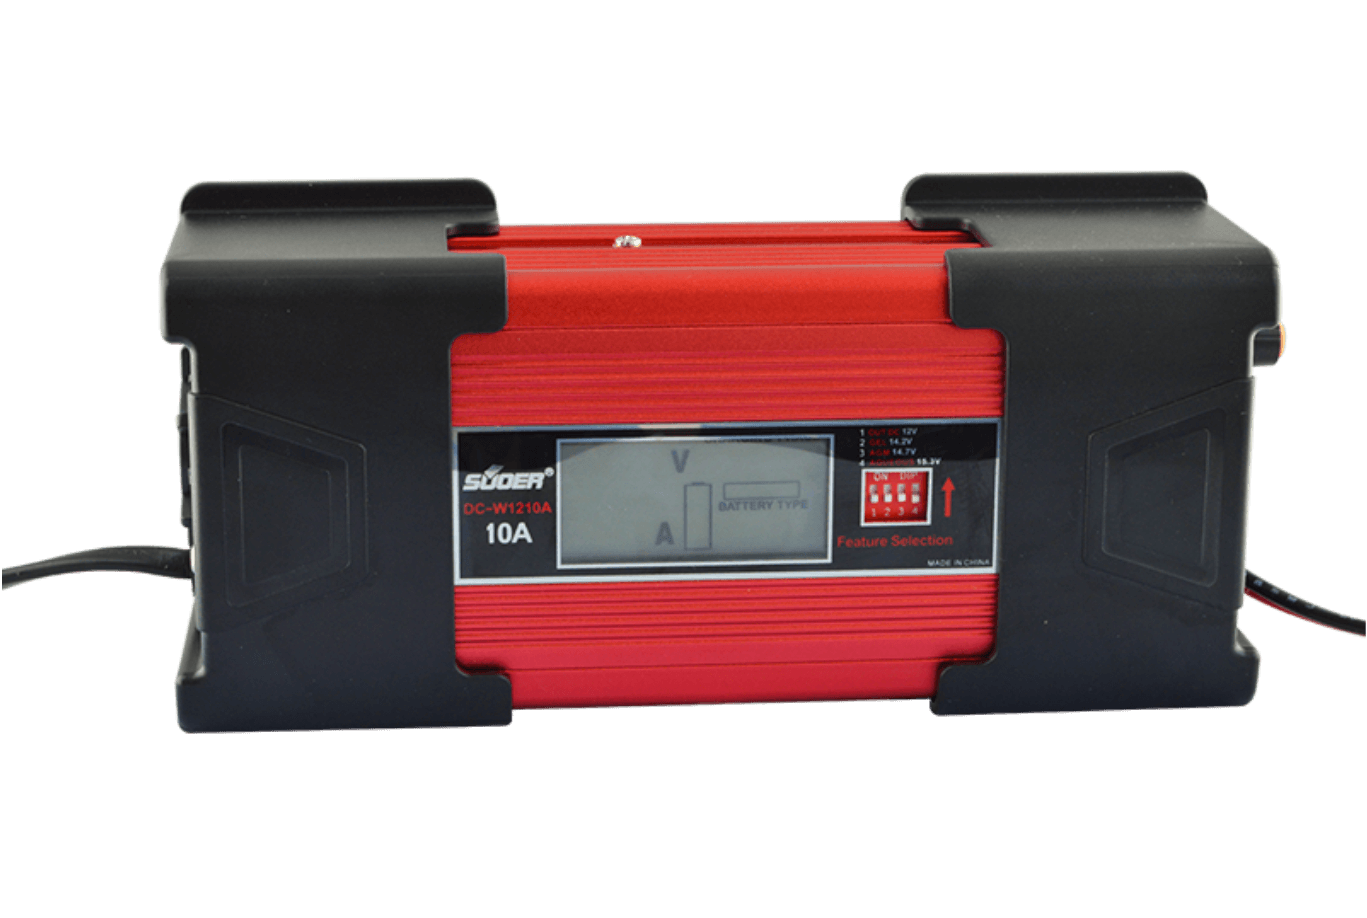 AGM/GEL Battery Charger - DC-W1210A